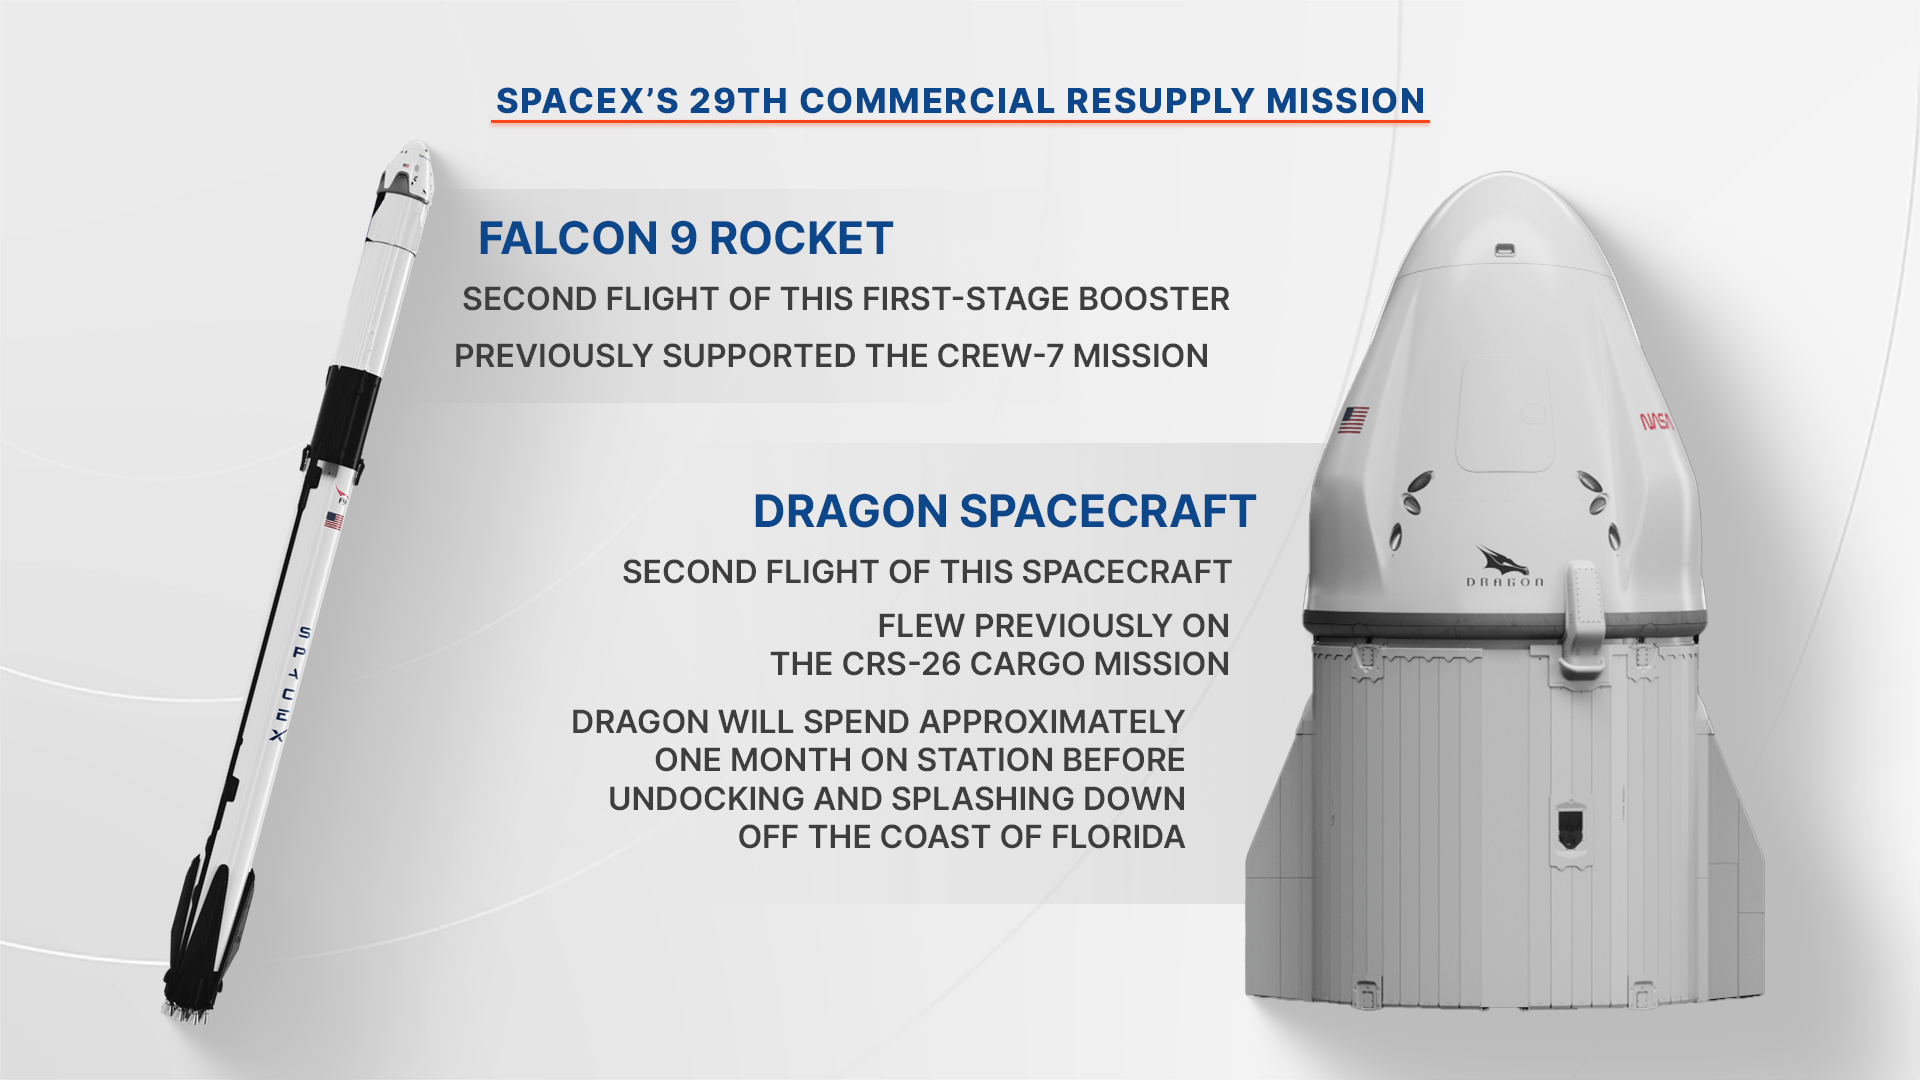 SpaceX's 29th Commercial Resupply Mission. Falcon 9 Rocket. Second flight of this first-stage booster. Previously supported the Crew-7 mission. Dragon Spacecraft. Second flight of this spacecraft. Flew previously on the CRS-26 cargo mission. Dragon will spend approximately one month on station before undocking and splashing down off the coast of Florida.